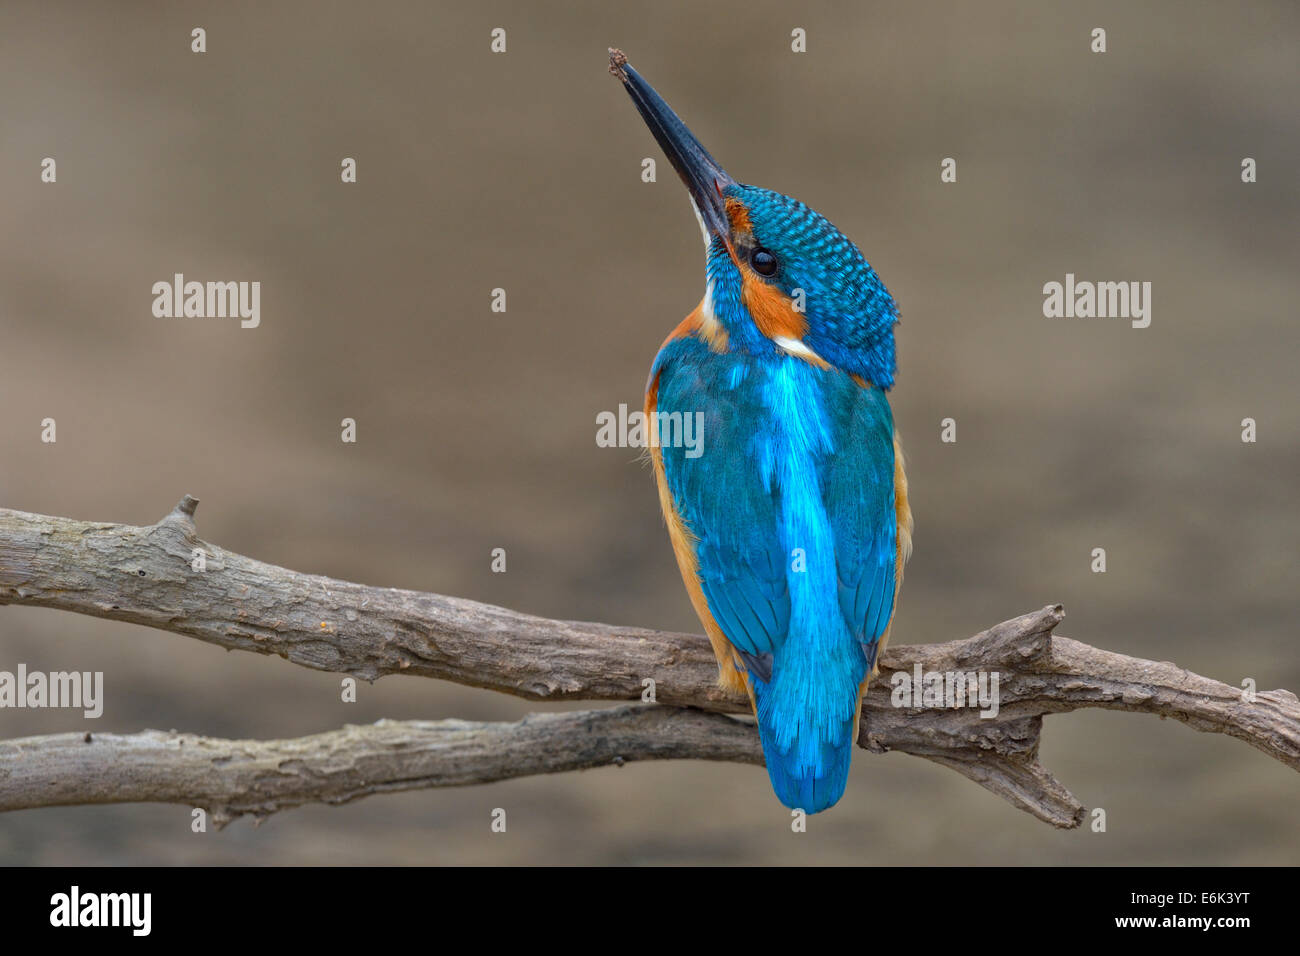 Kingfisher (Alcedo atthis), male with clay at the tip of its beak, Swabian Alb Biosphere Reserve, Baden-Württemberg, Germany Stock Photo